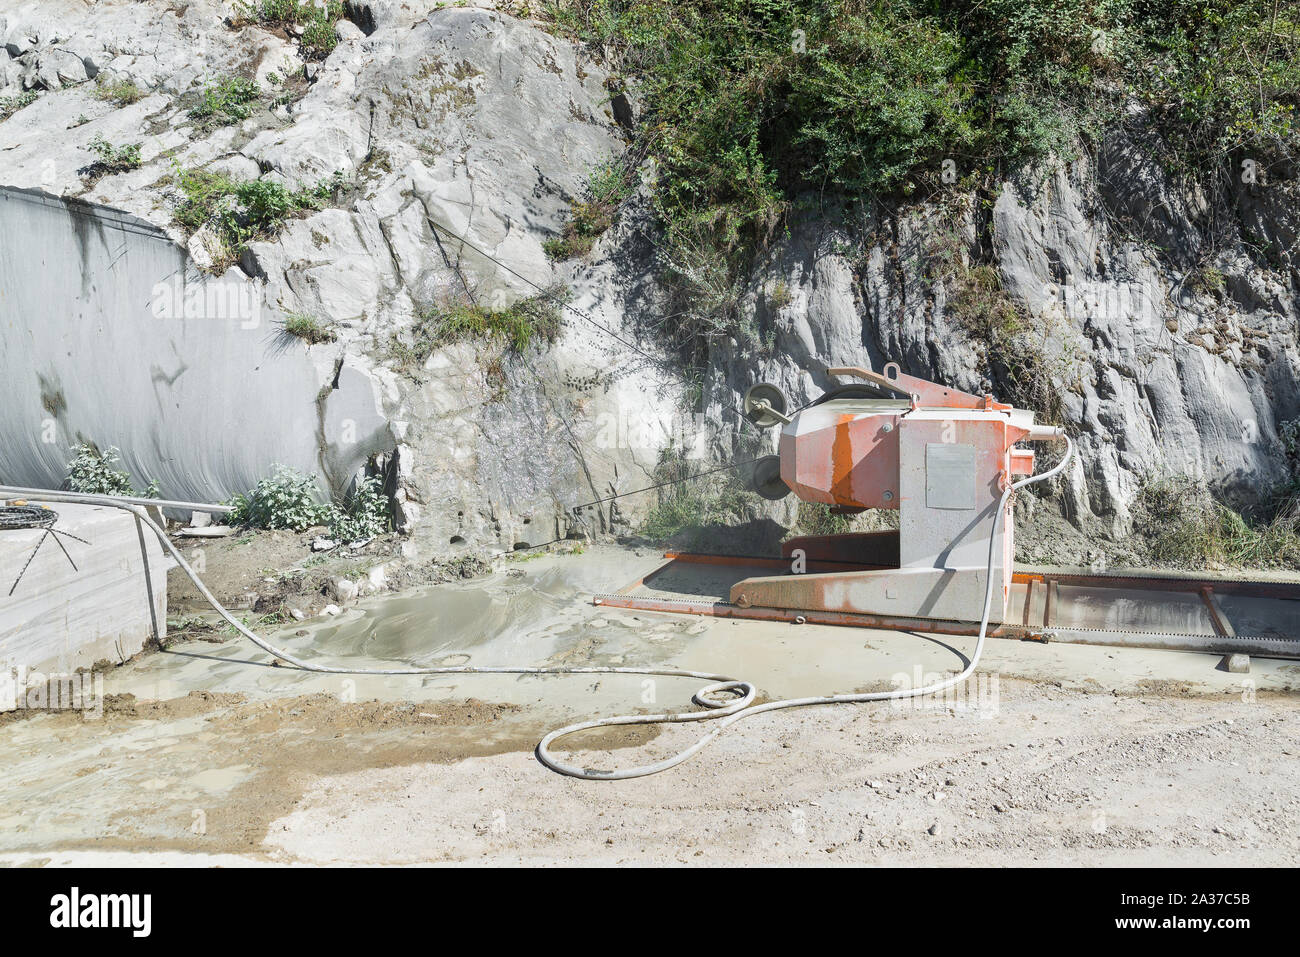 Marble cutting machine. Machine during the cutting phase in a quarry. Stone processing Stock Photo